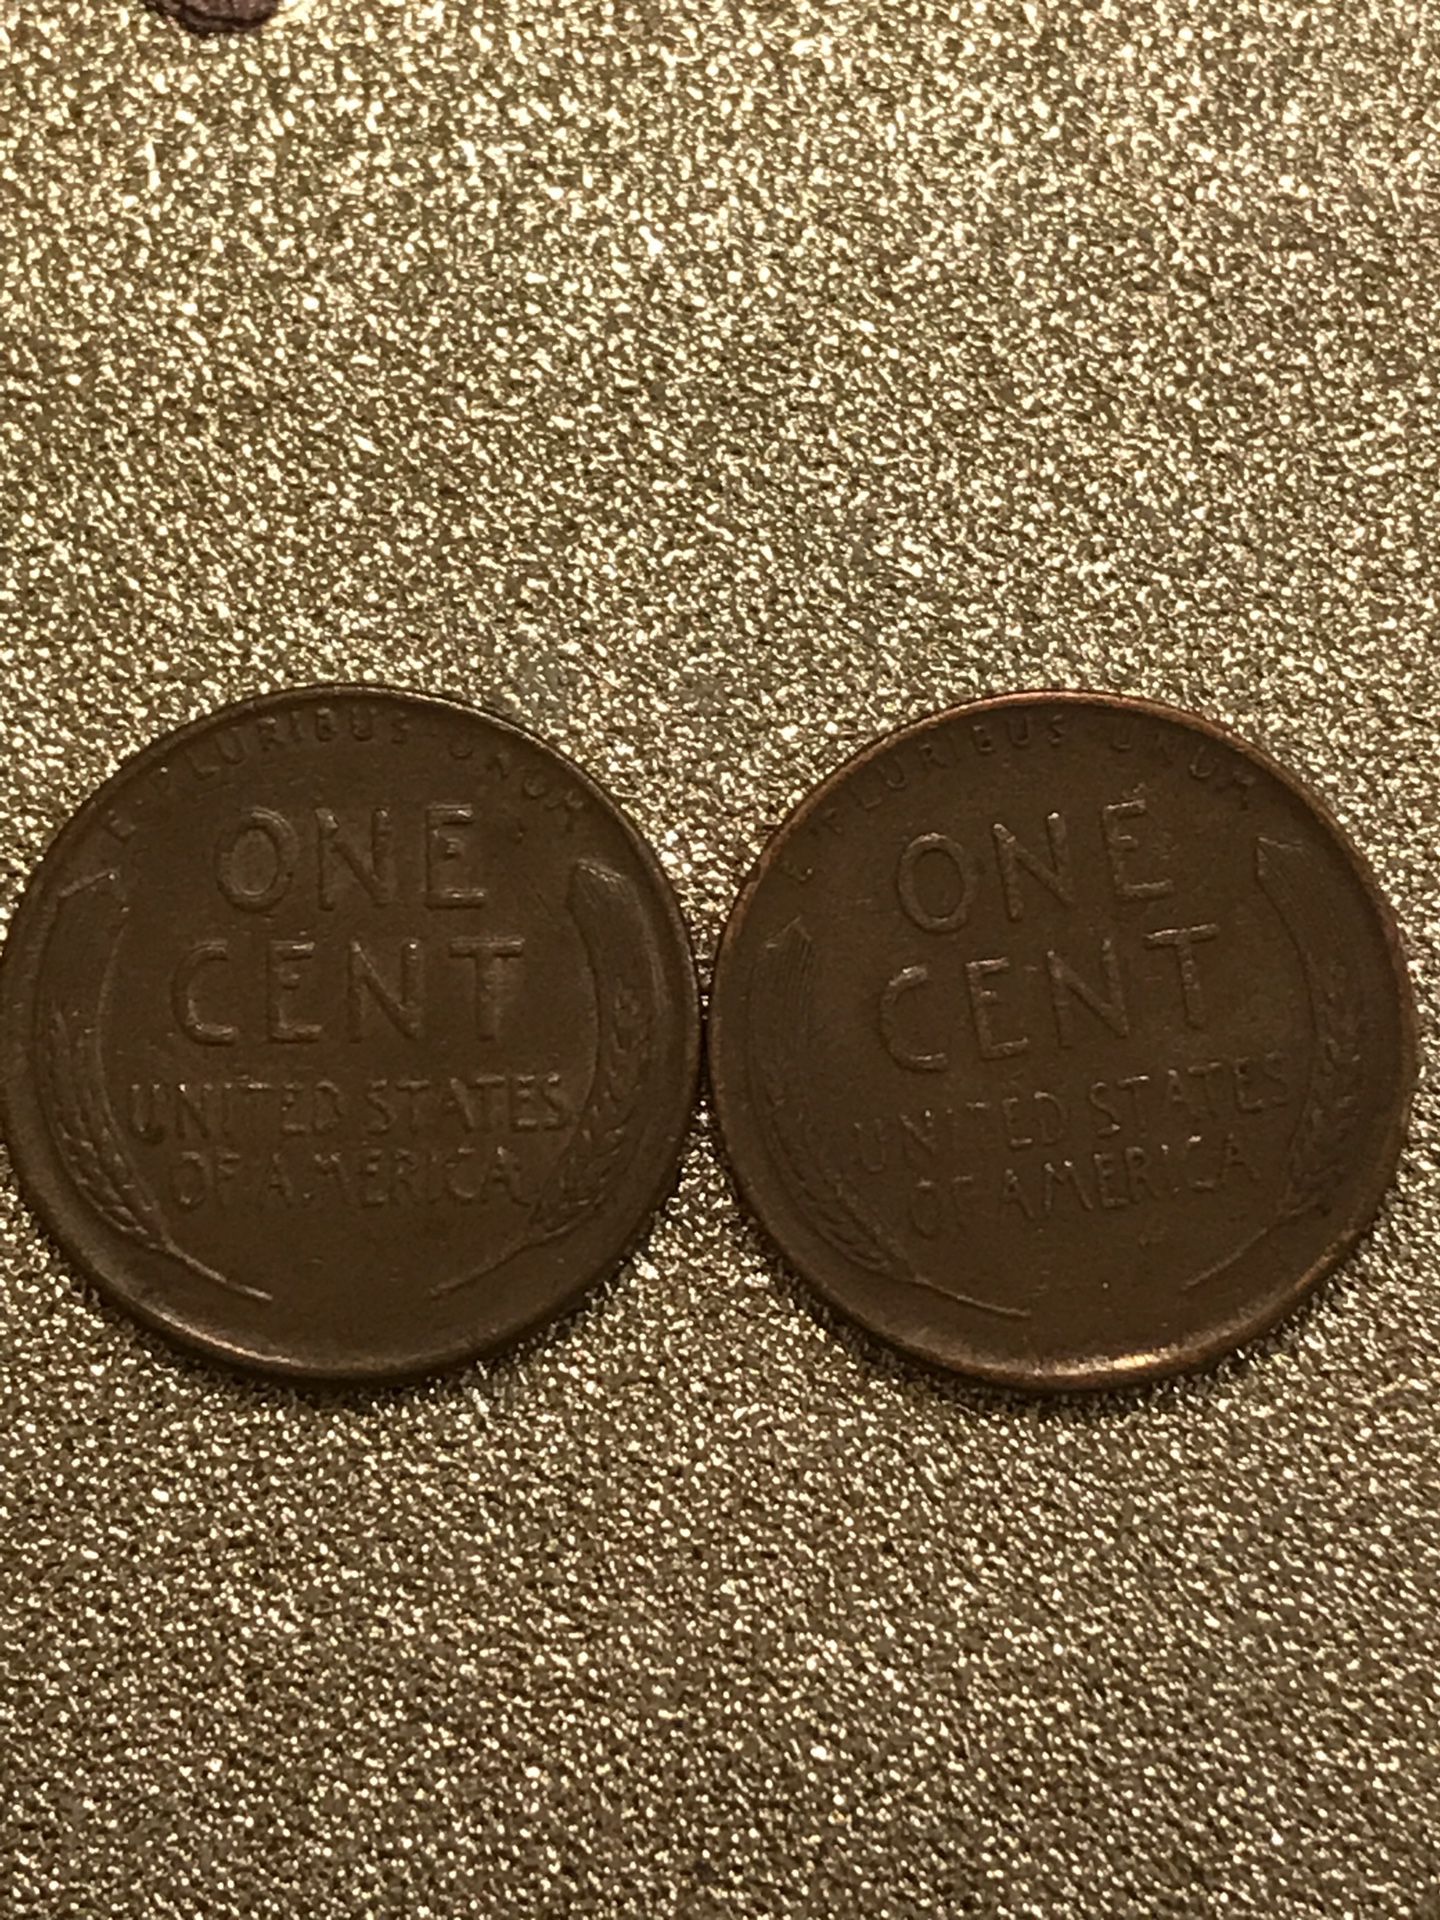 Pennys 1956-1945 collection